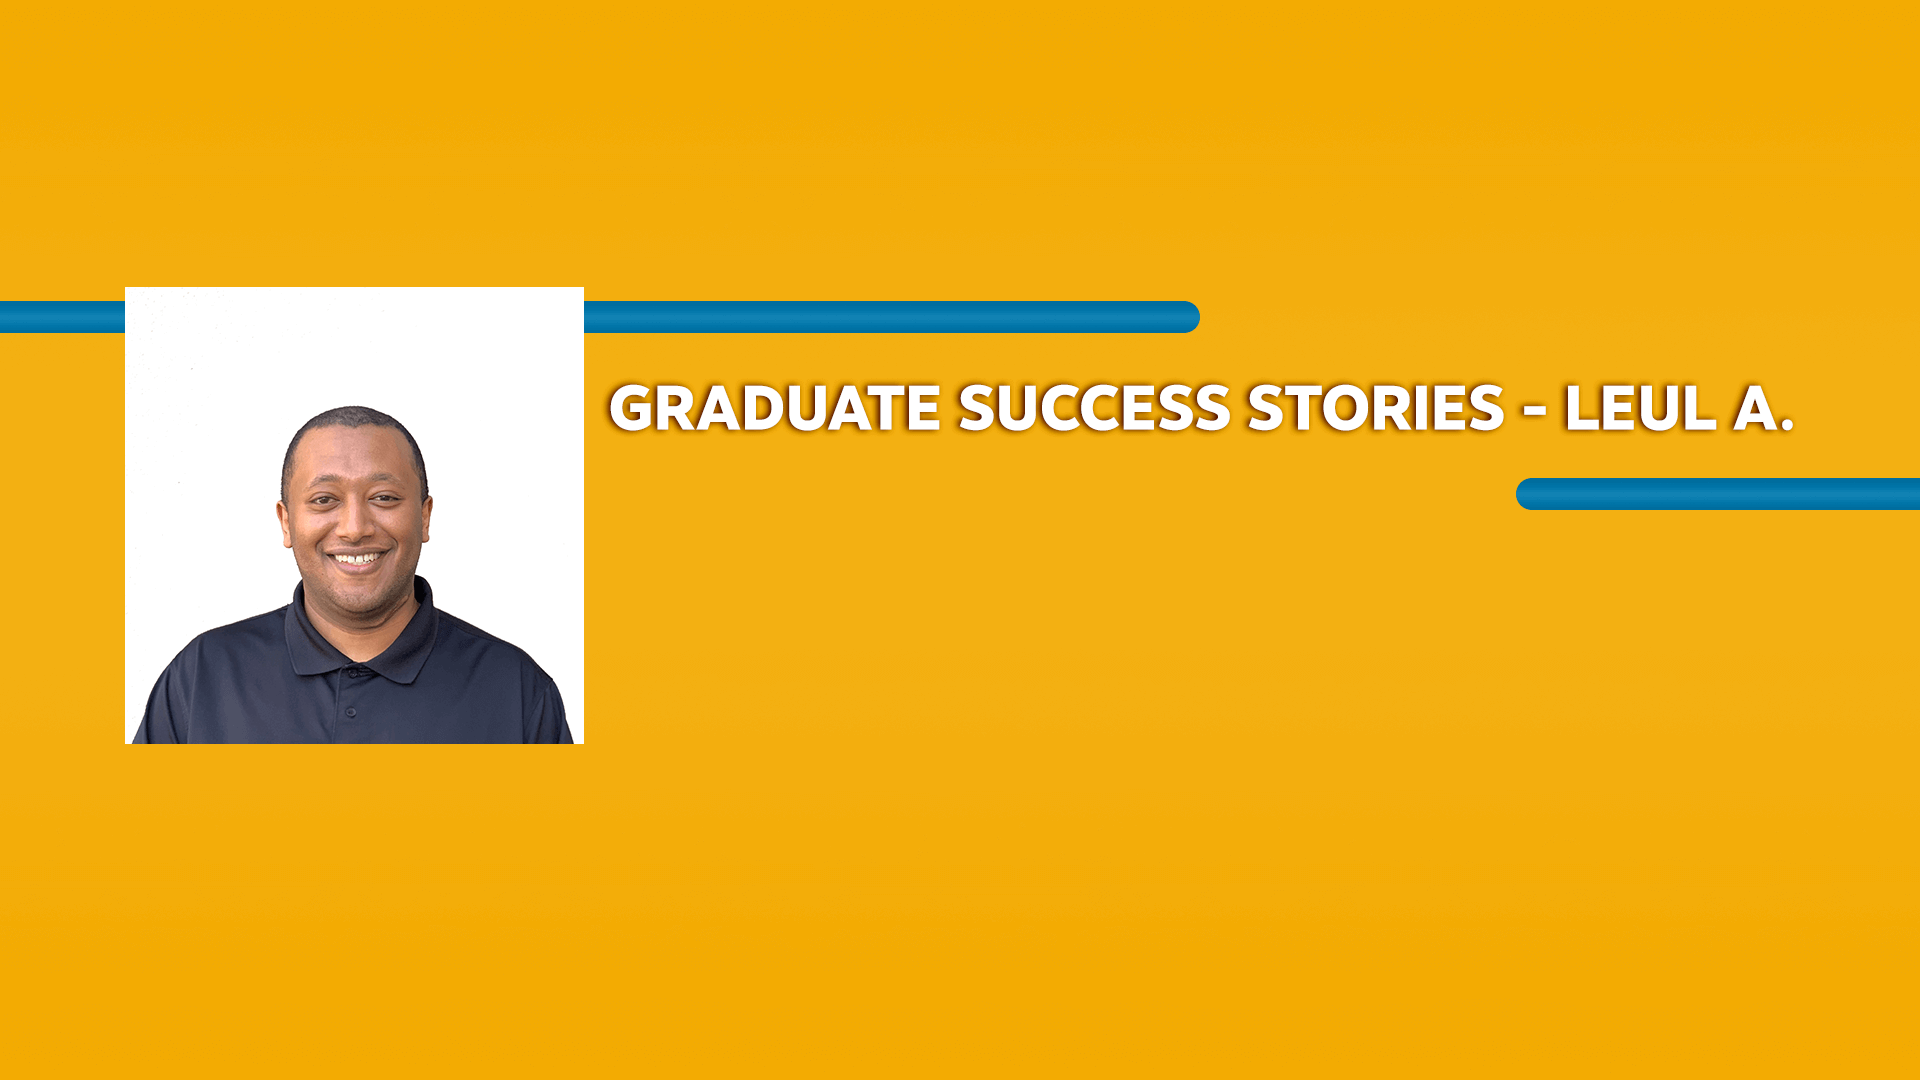 Orange rectangle with a picture of a man wearing a polo shirt and Graduate Success Stories - Leul A. text in white font